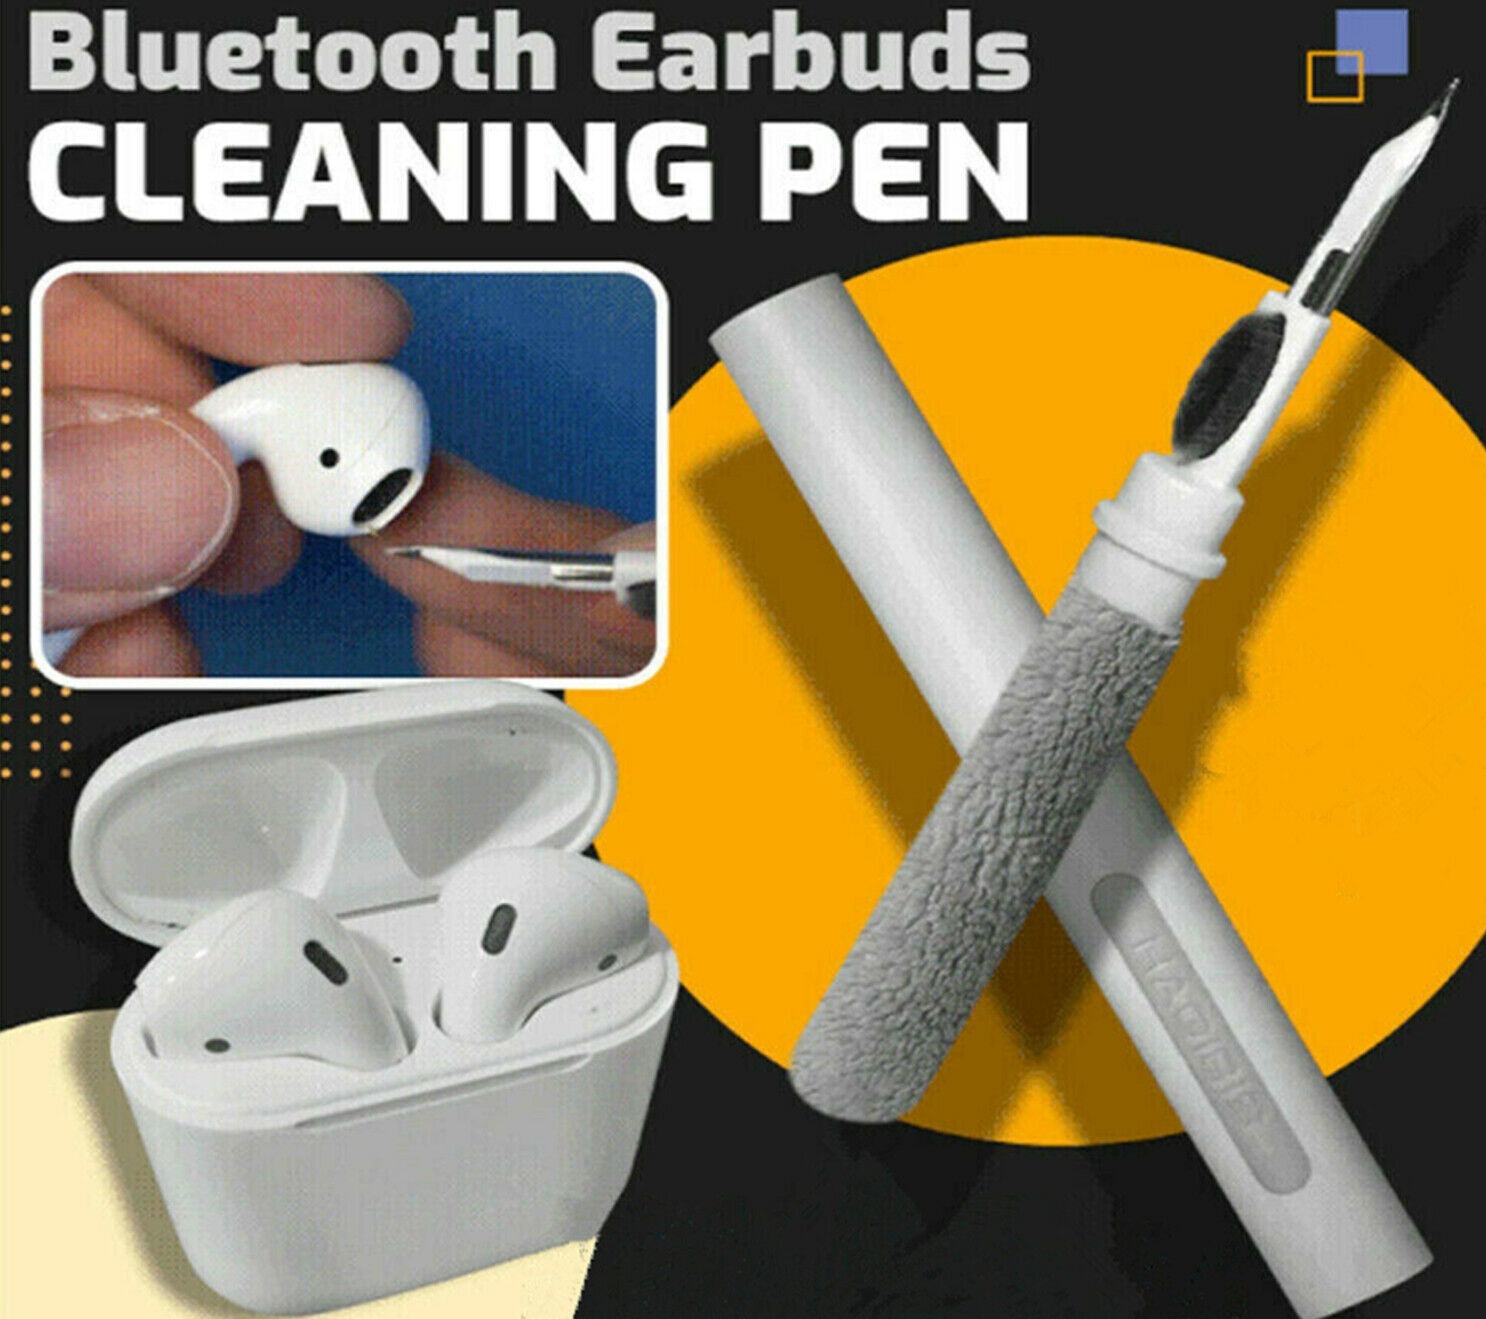 Free shipping- Bluetooth Earbuds Cleaning Pen Kit Clean Brush for Airpods Wireless Earphones